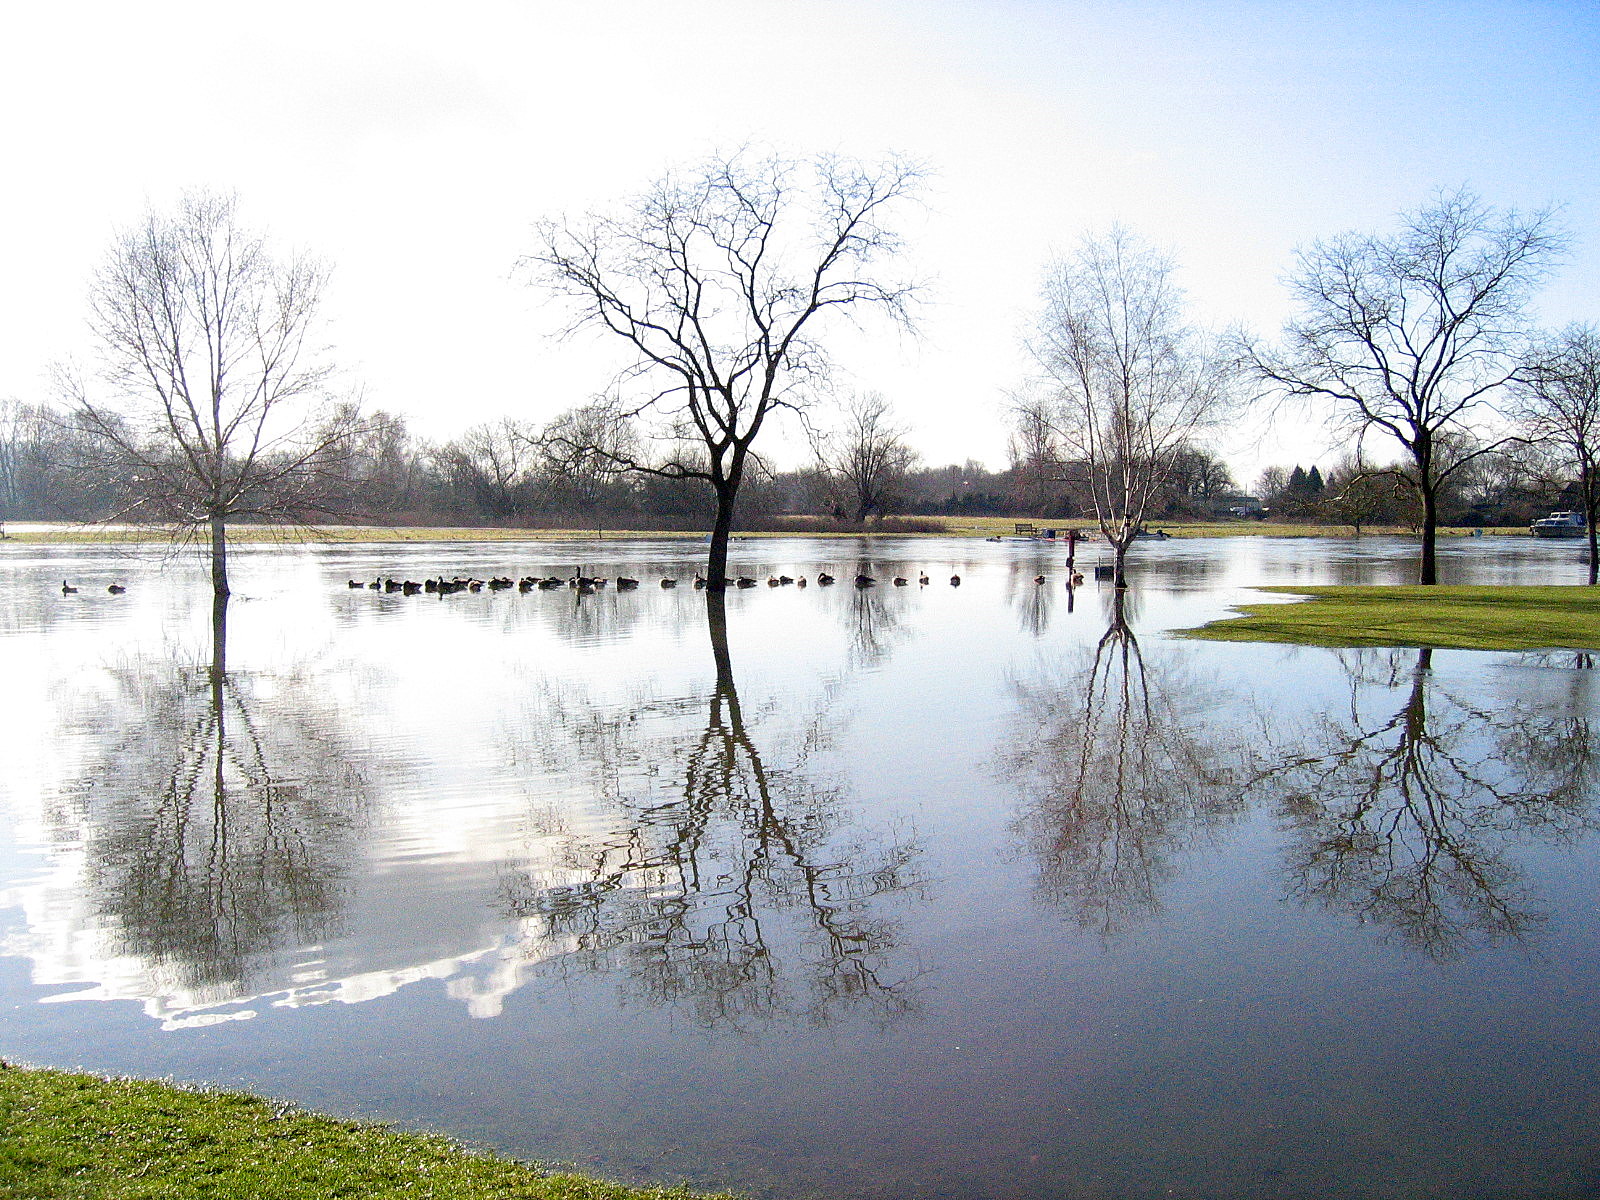 flooded grass area next to a large body of water with many trees